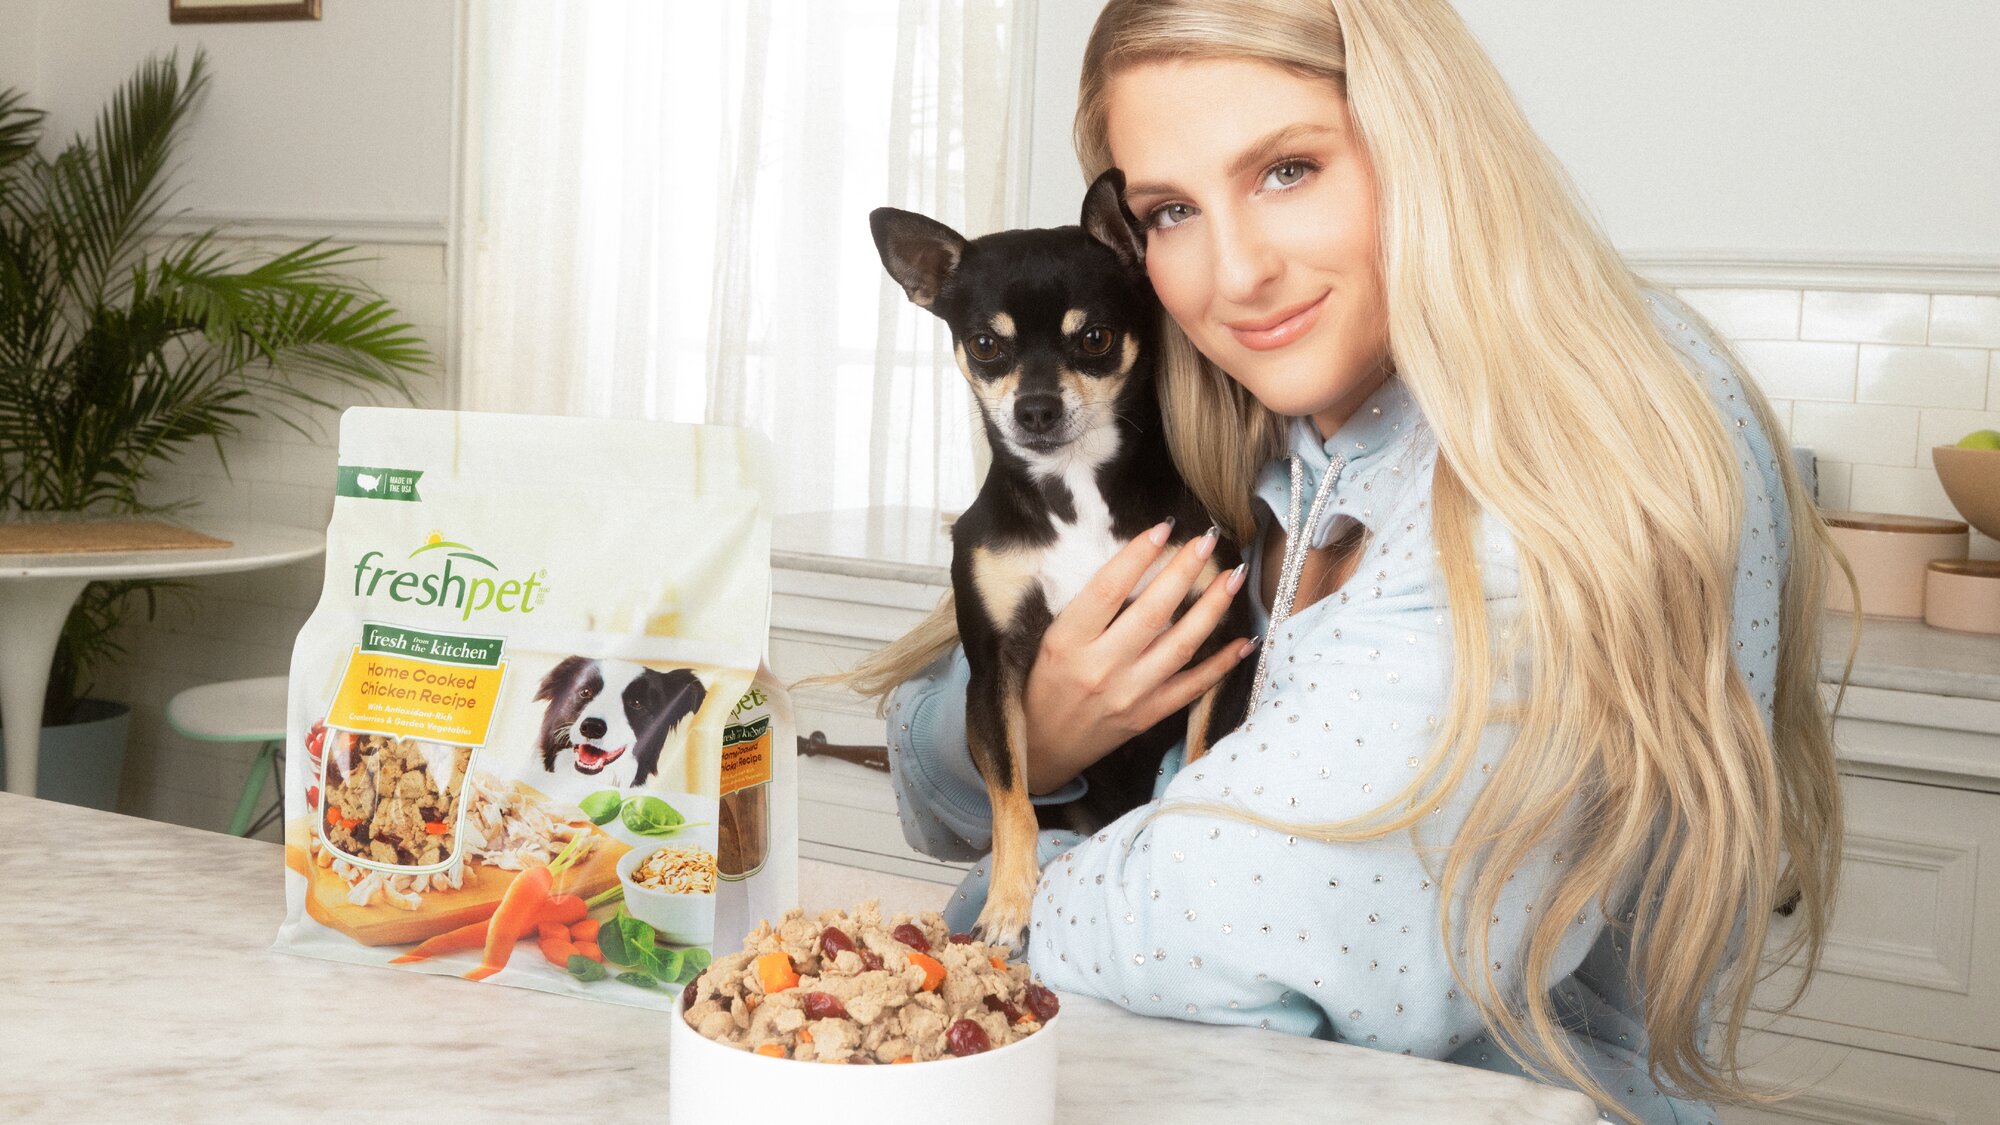 Meghan Trainor holding a dog with a bag of Freshpet on a table.